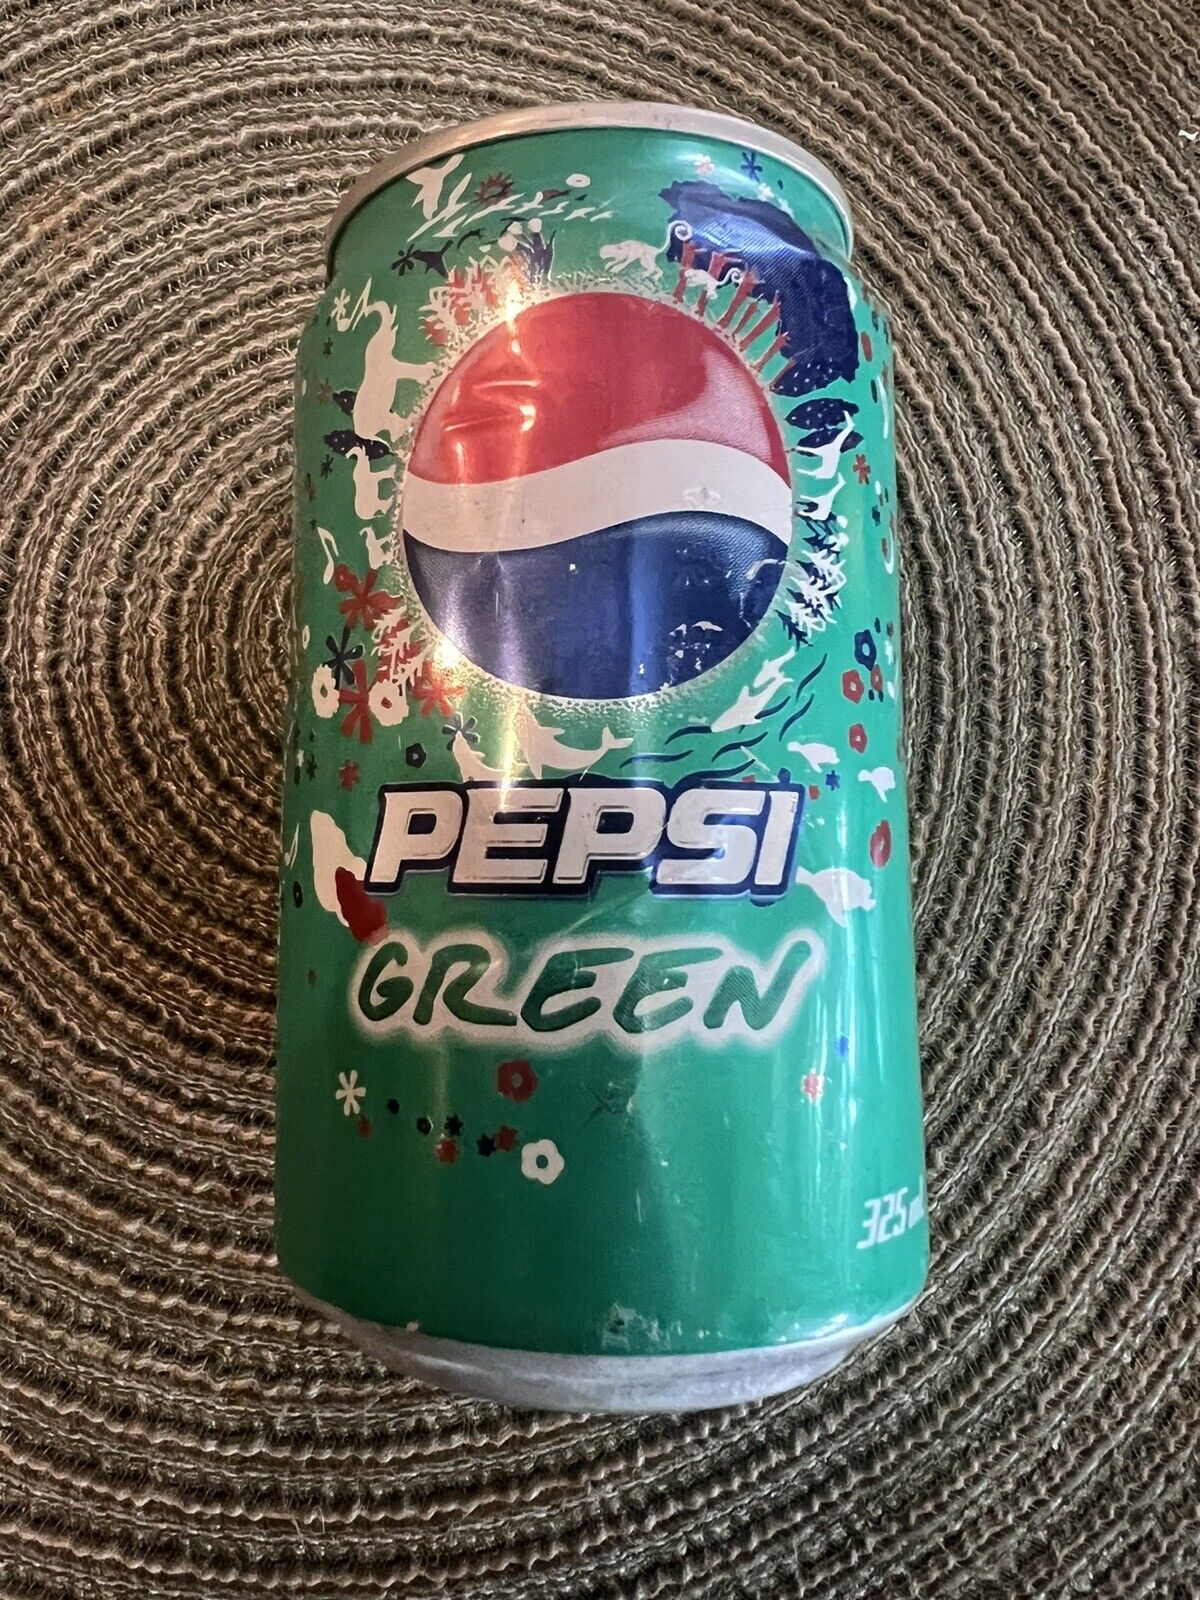 PEPSI GREEN 325ml CAN 2009 Limited Edition from Thailand